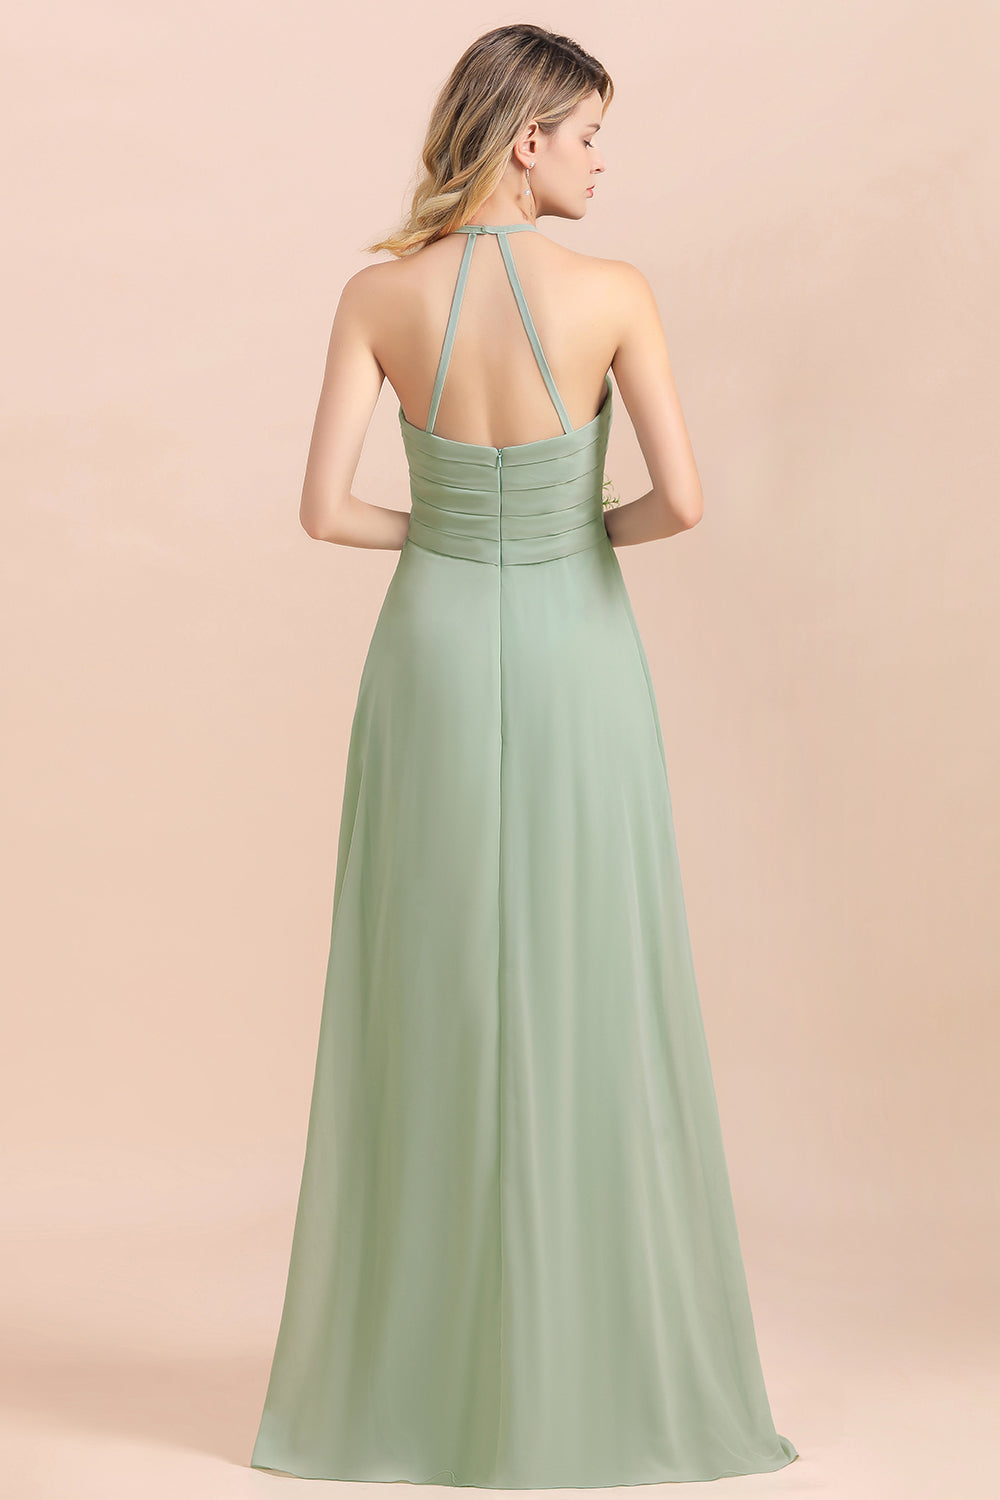 Load image into Gallery viewer, A-Line Halter Sweetheart Chiffon Sage Bridesmaid Dress Chic Long Wedding Guest Dress-BIZTUNNEL
